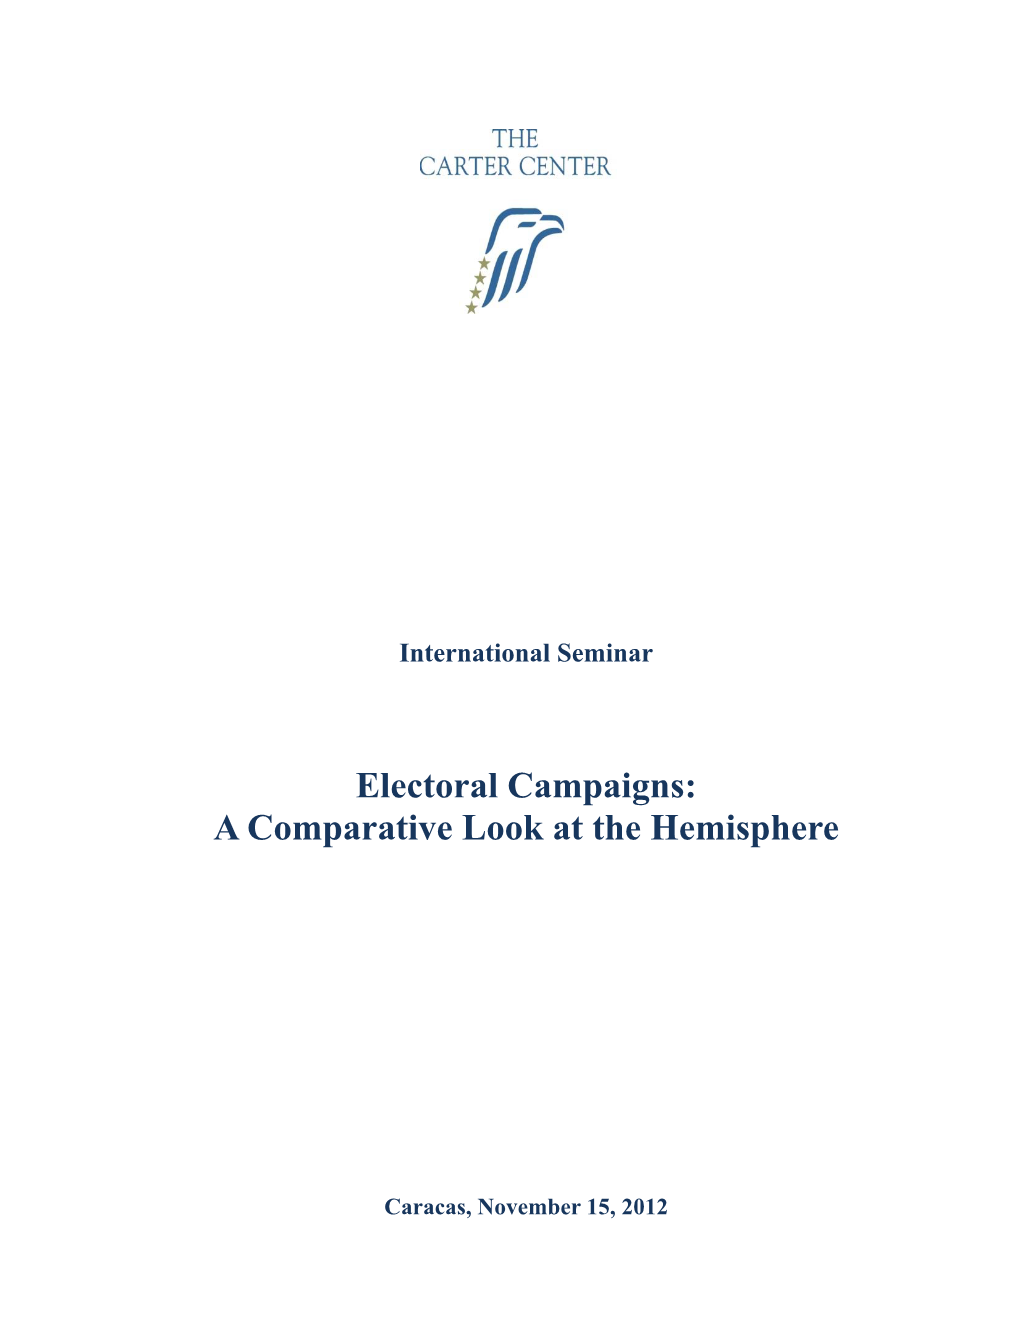 Electoral Campaigns: a Comparative Look at the Hemisphere